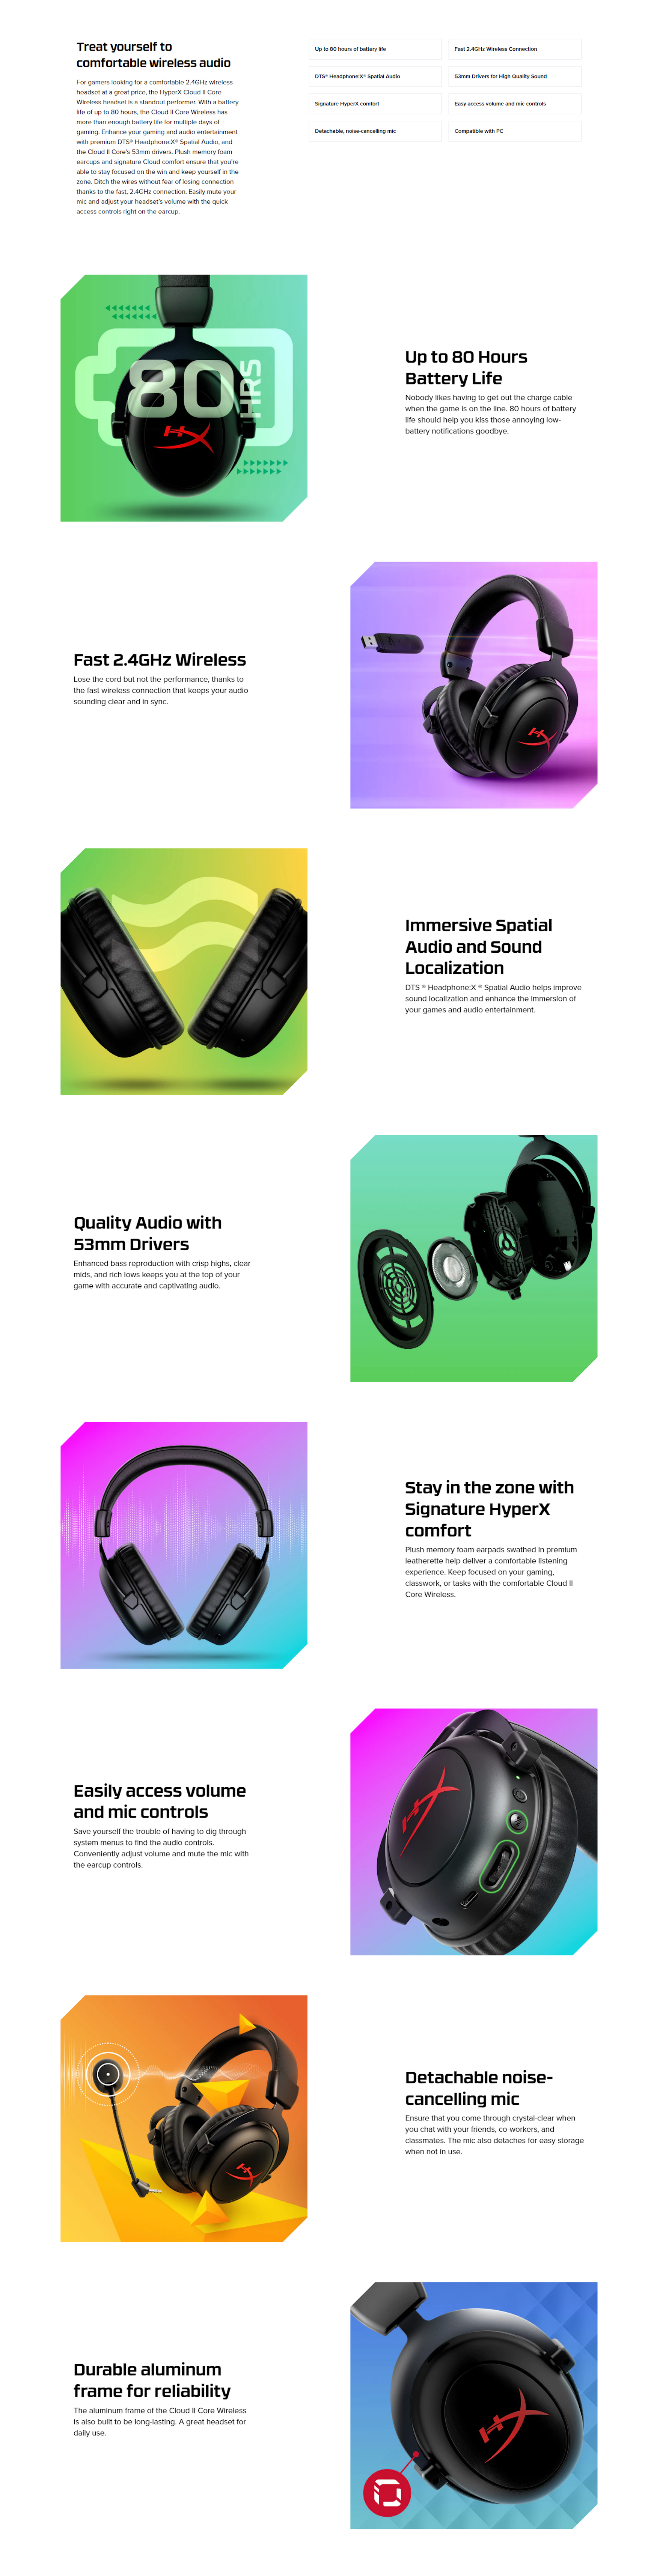 A large marketing image providing additional information about the product HyperX Cloud II Core - Wireless Gaming Headset - Additional alt info not provided